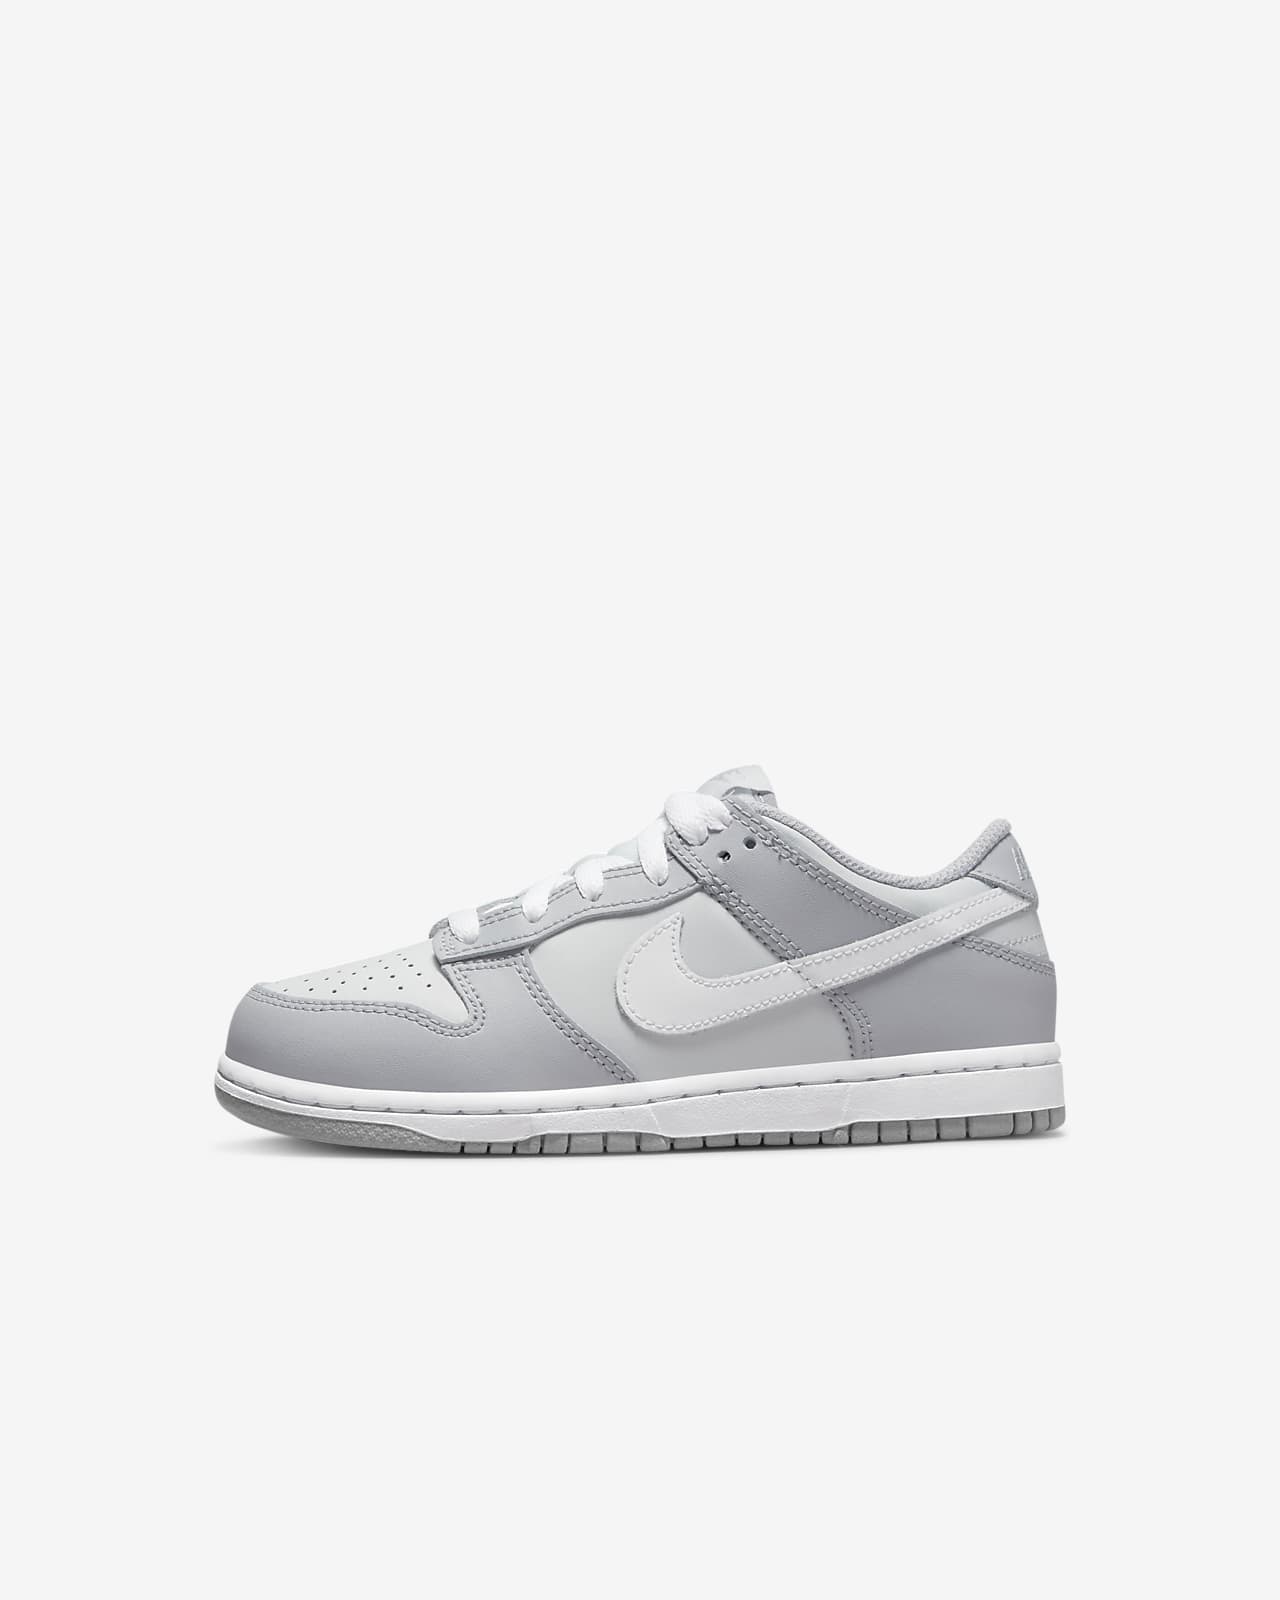 Nike Dunk Low Younger Kids' Shoes. Nike NL